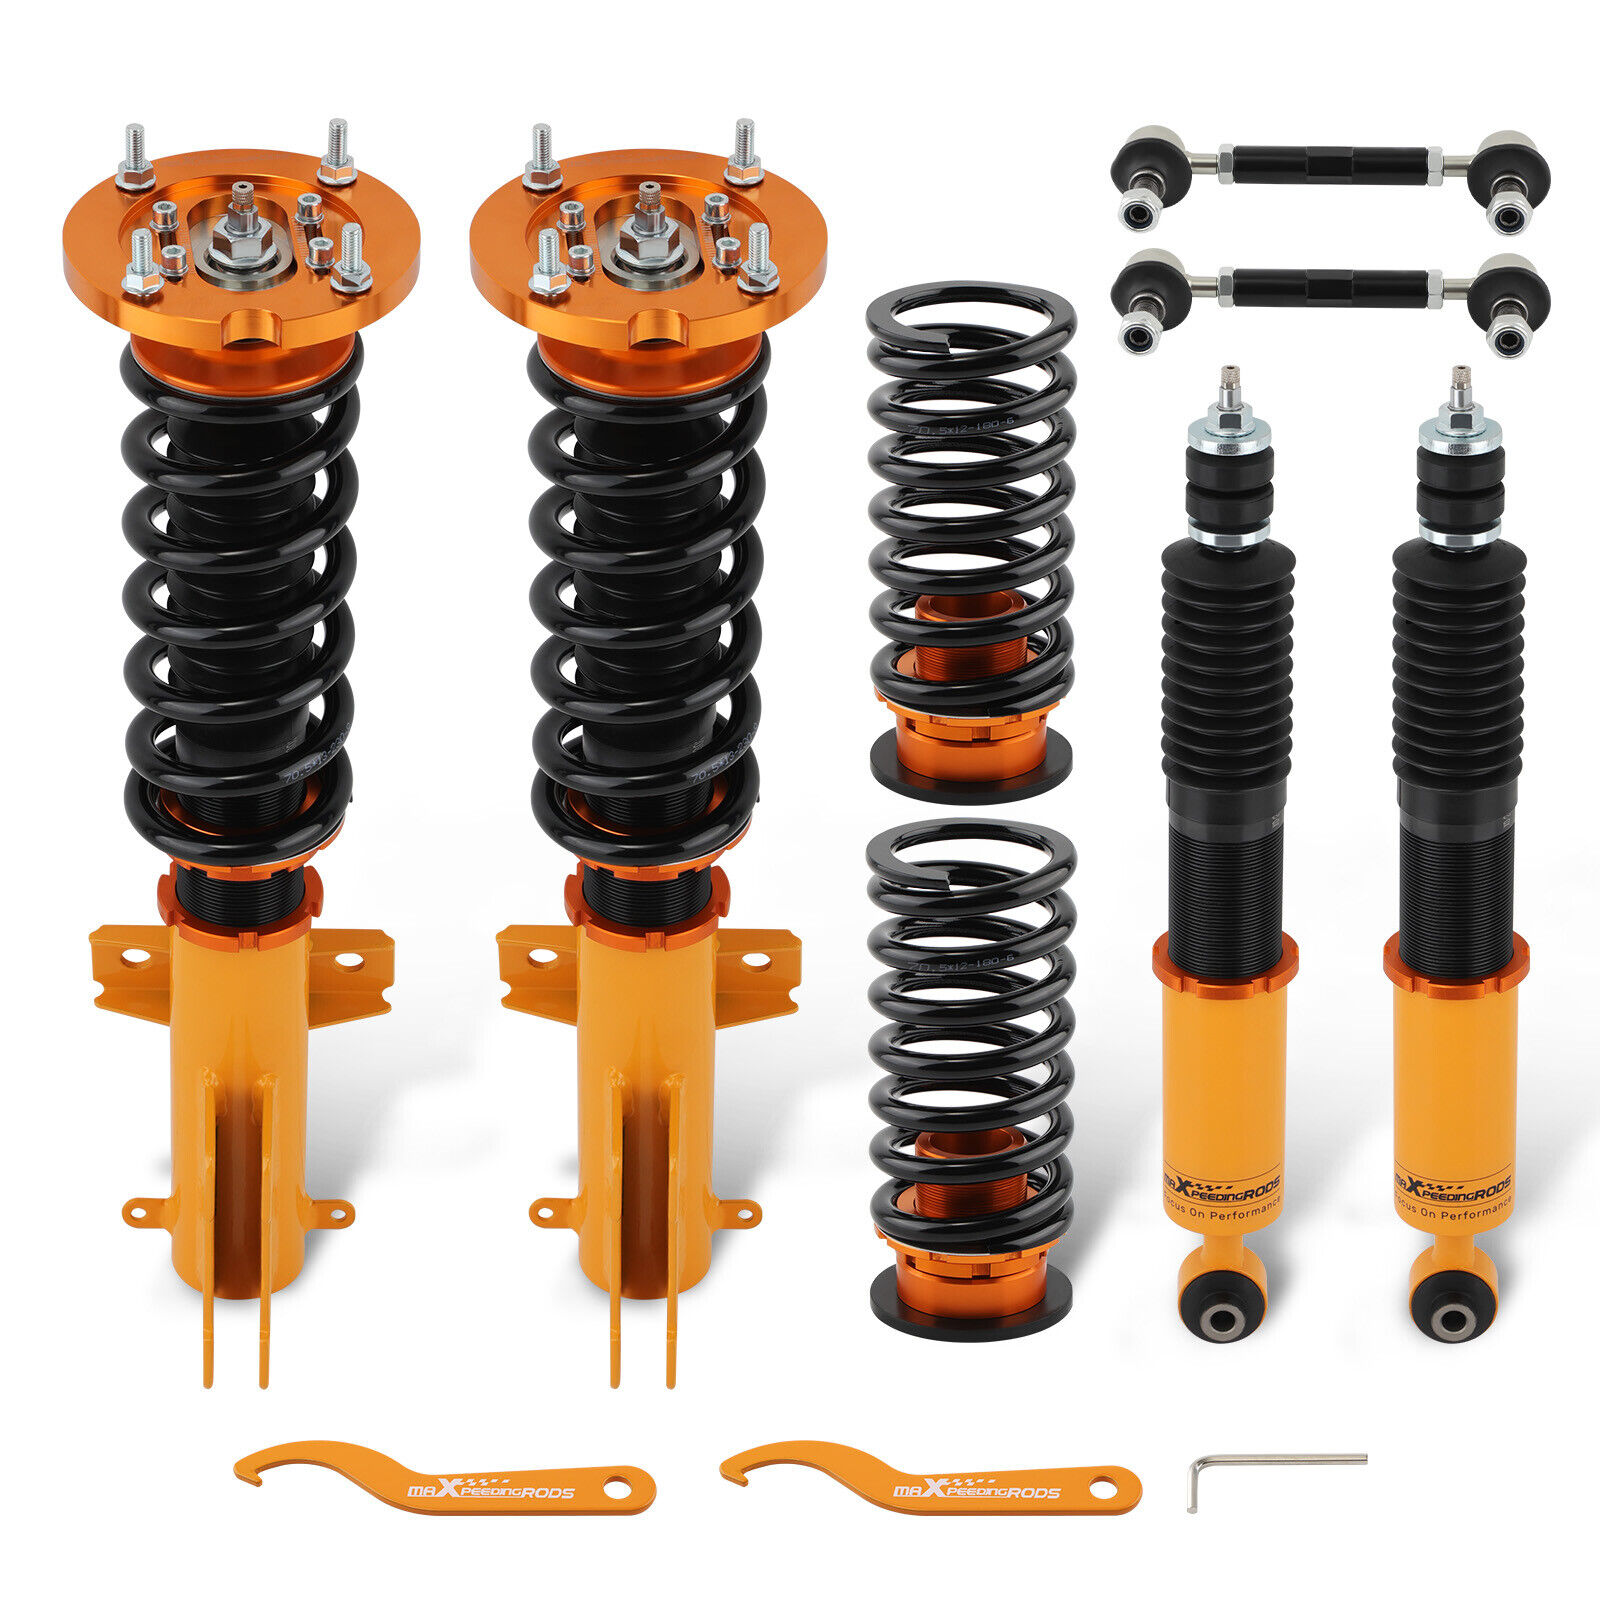 24 Level Damper Adj. Coilovers Struts Absorbers For Ford Mustang 2005-2014